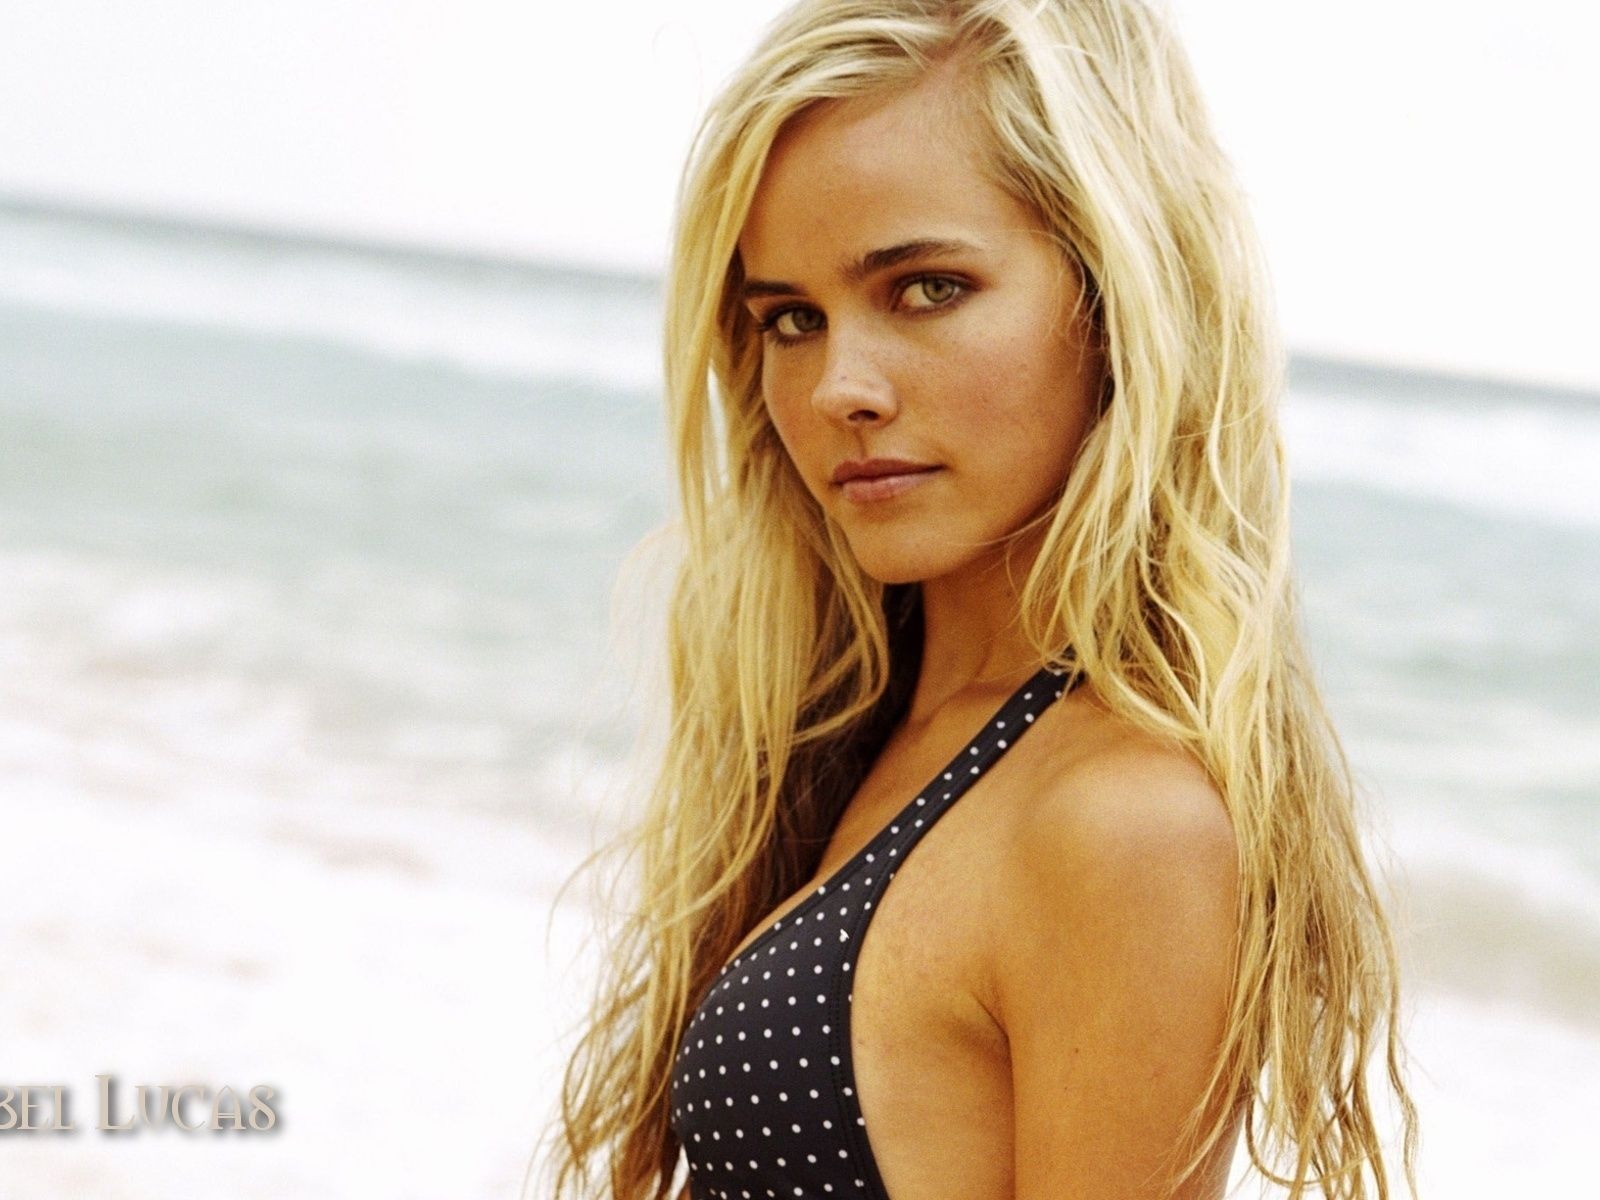 Isabel Lucas #001 - 1600x1200 Wallpapers Pictures Photos Images